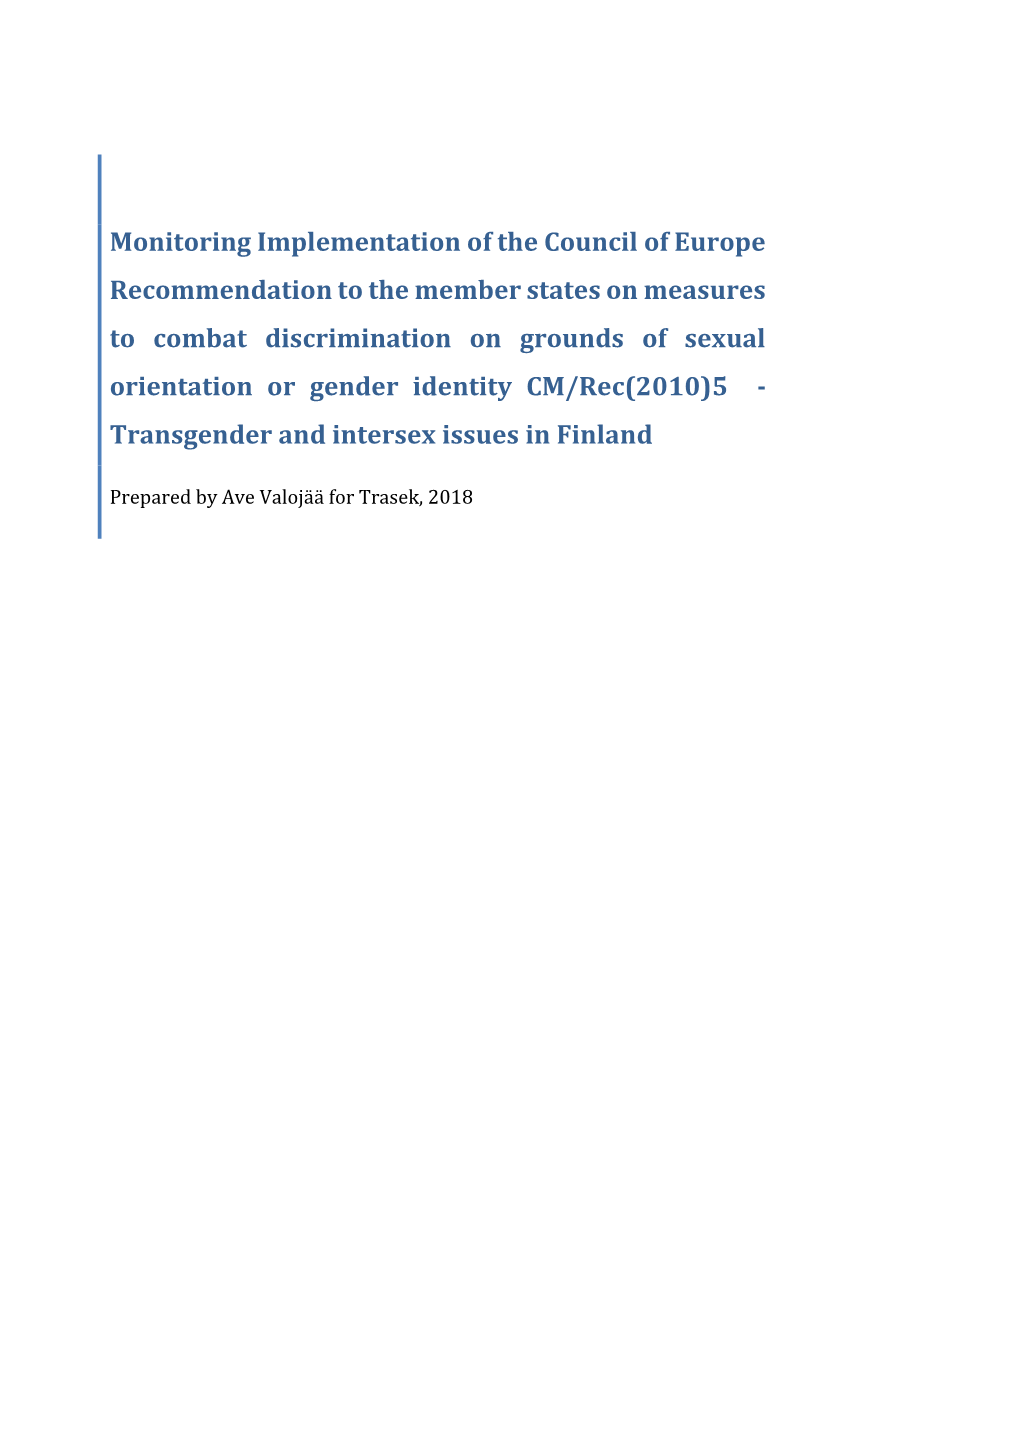 Monitoring Implementation of the Council of Europe Recommendation to the Member States on Measures to Combat Discrimination on G